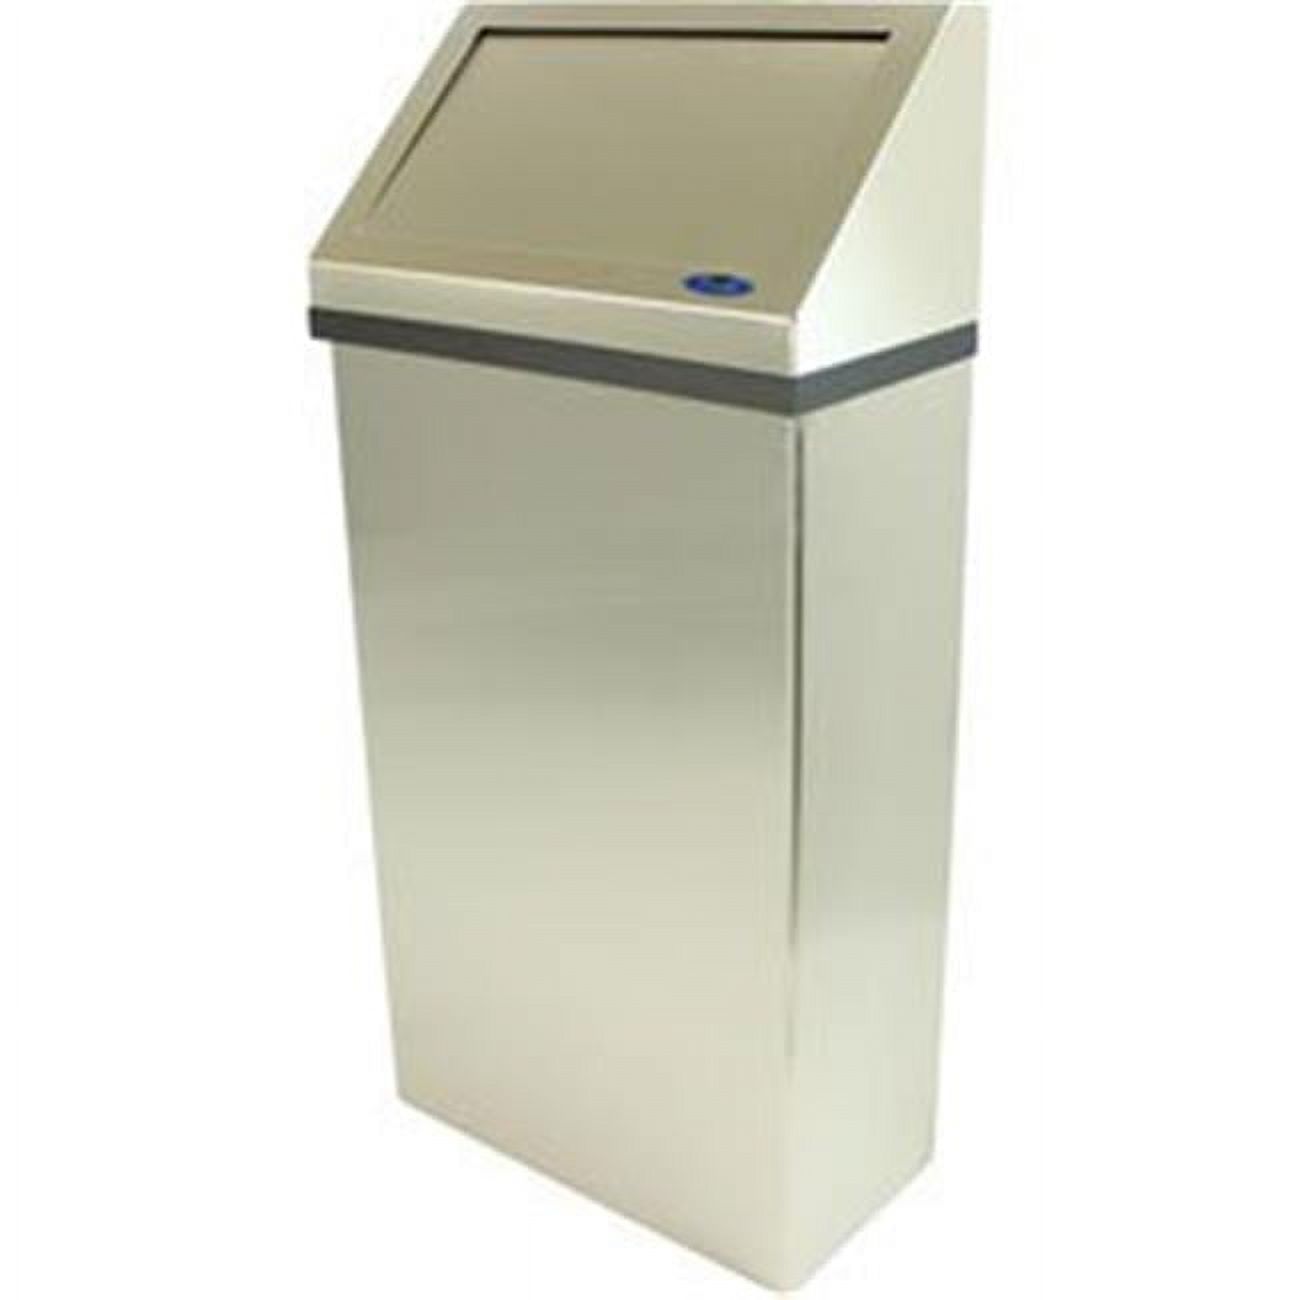 Frost Products B956306 Wall Mounted Stainless Steel Waste Receptacle, 11 gal - image 1 of 2